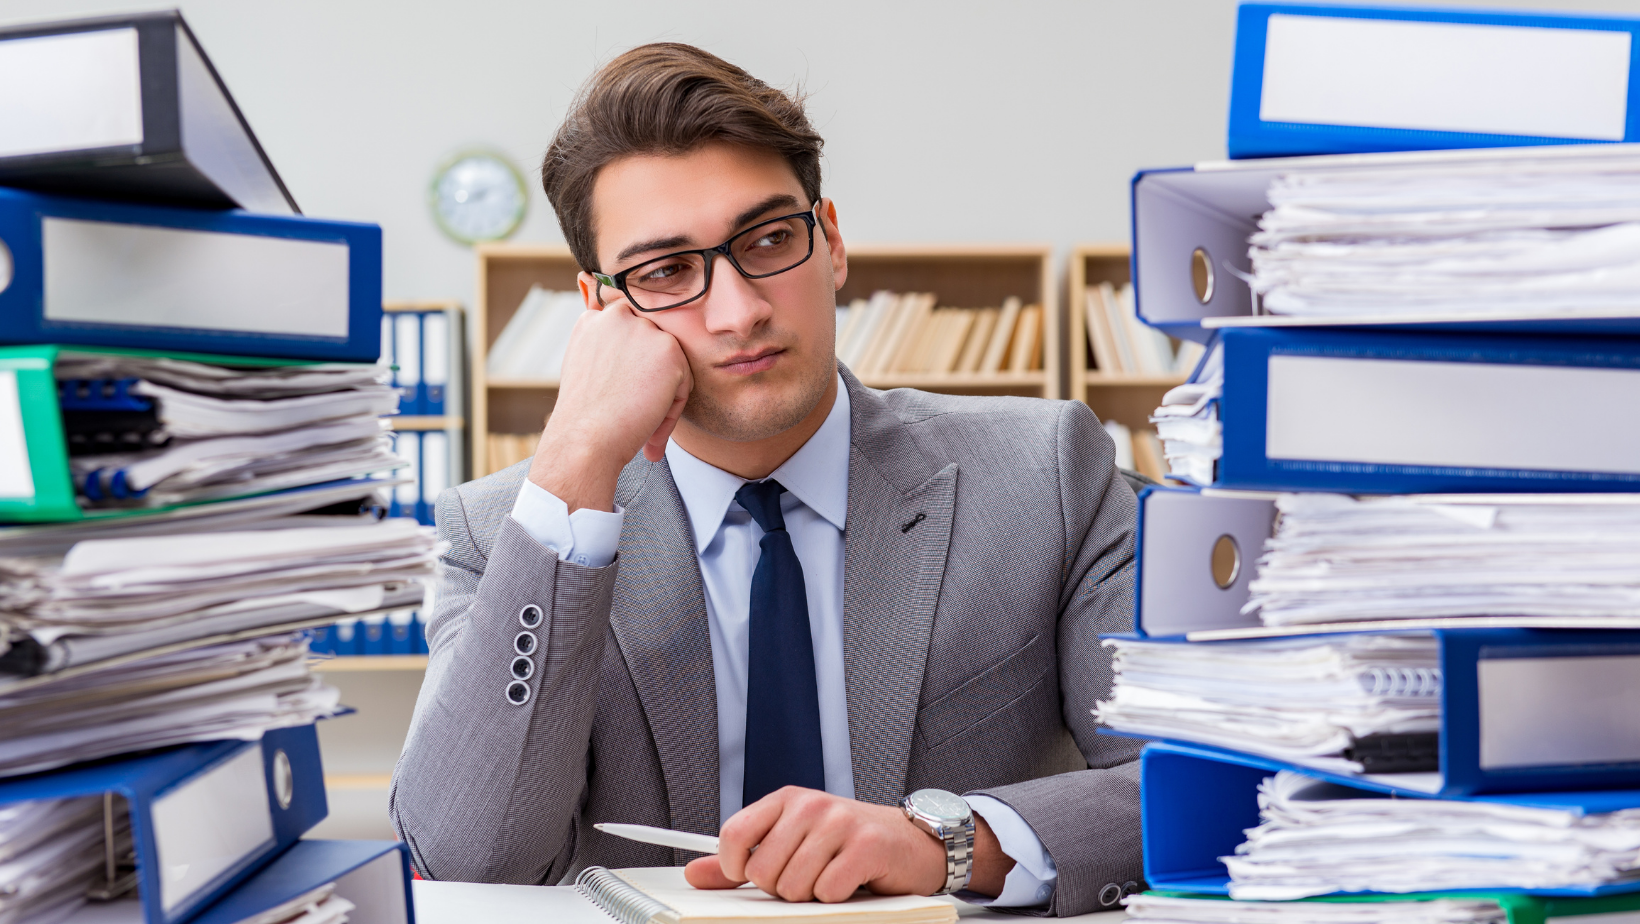 Man struggling with too much work